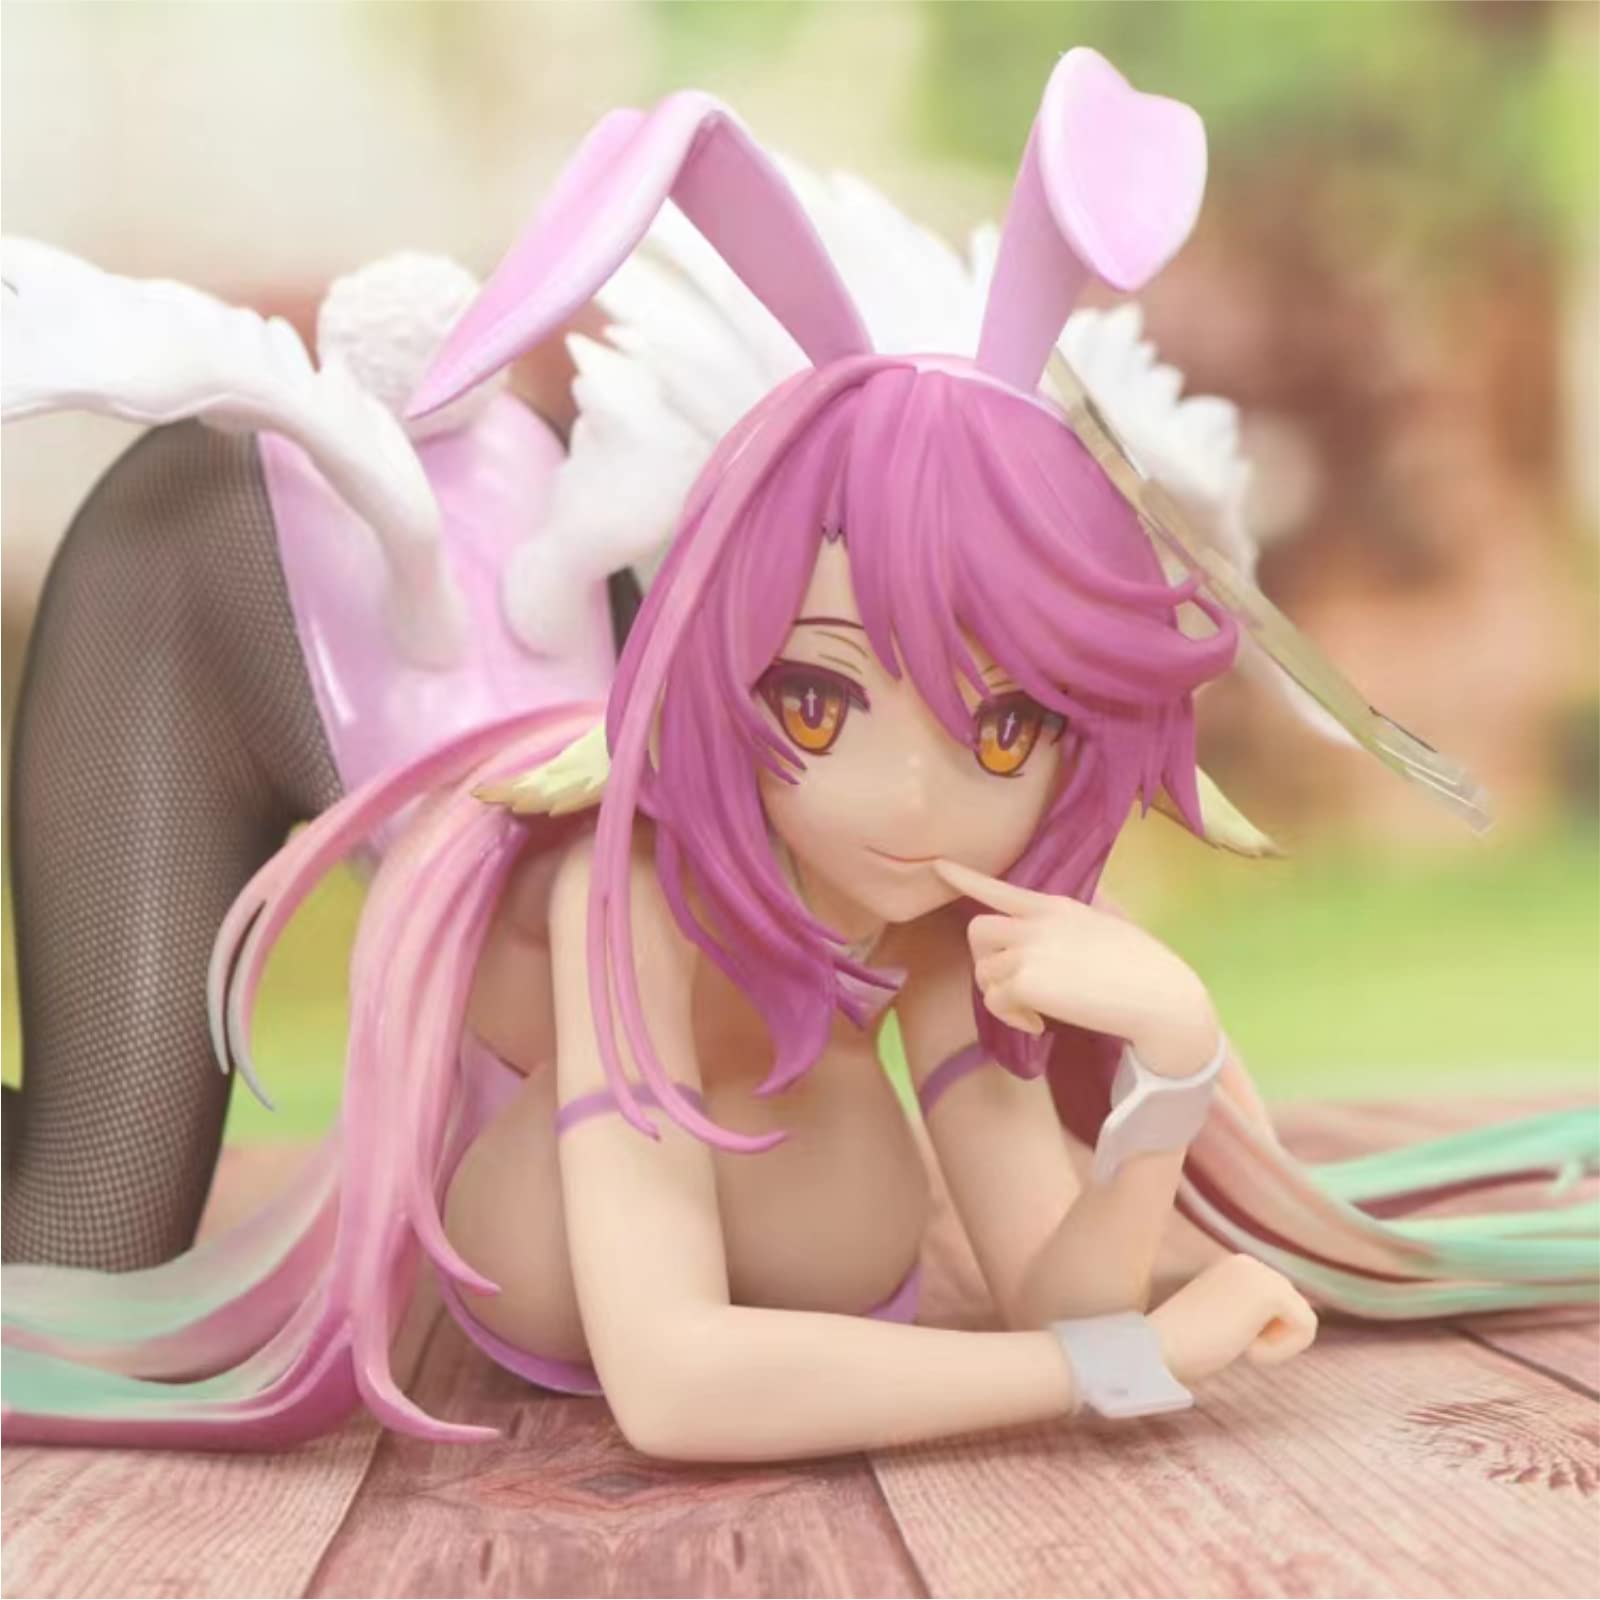 WYLURA Anime Statue Cell Phone Holder – Phone Desk Stand – Phone Stand  Holder for Office and Home – Anime Figure Phone Holder: Amazon.co.uk: Toys  & Games